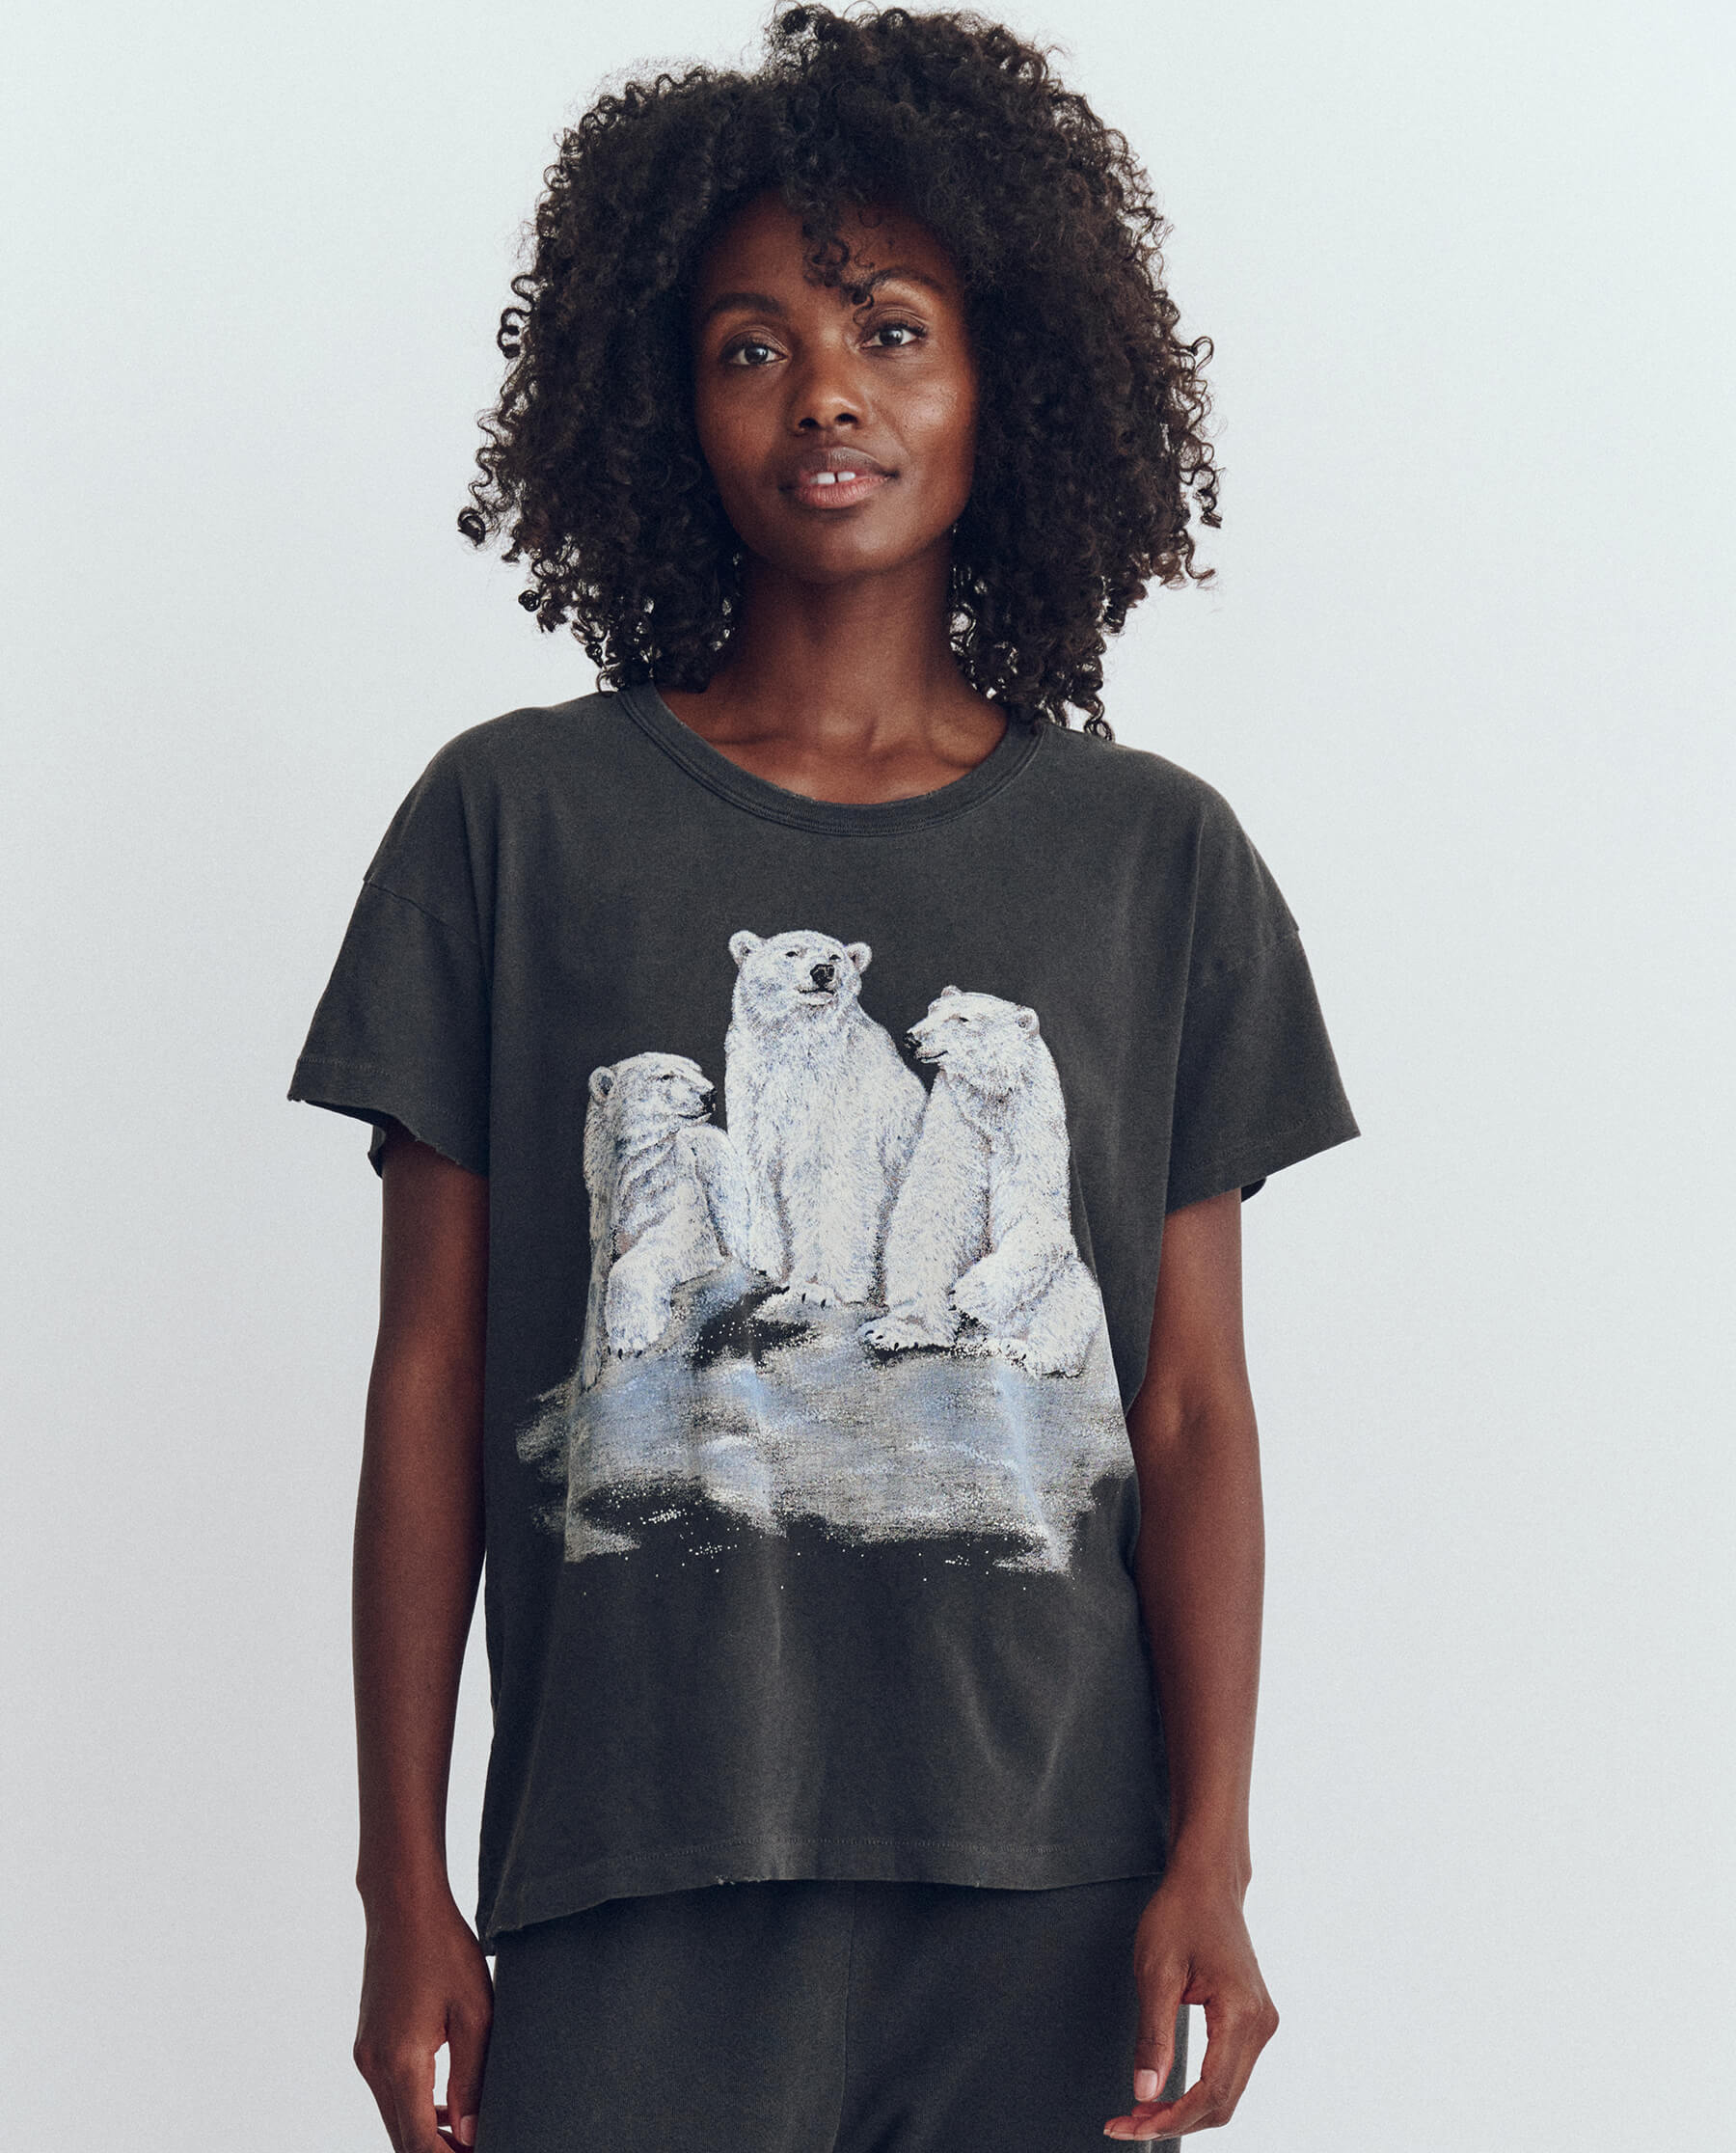 The Boxy Crew. Graphic -- Washed Black with Polar Bear Graphic